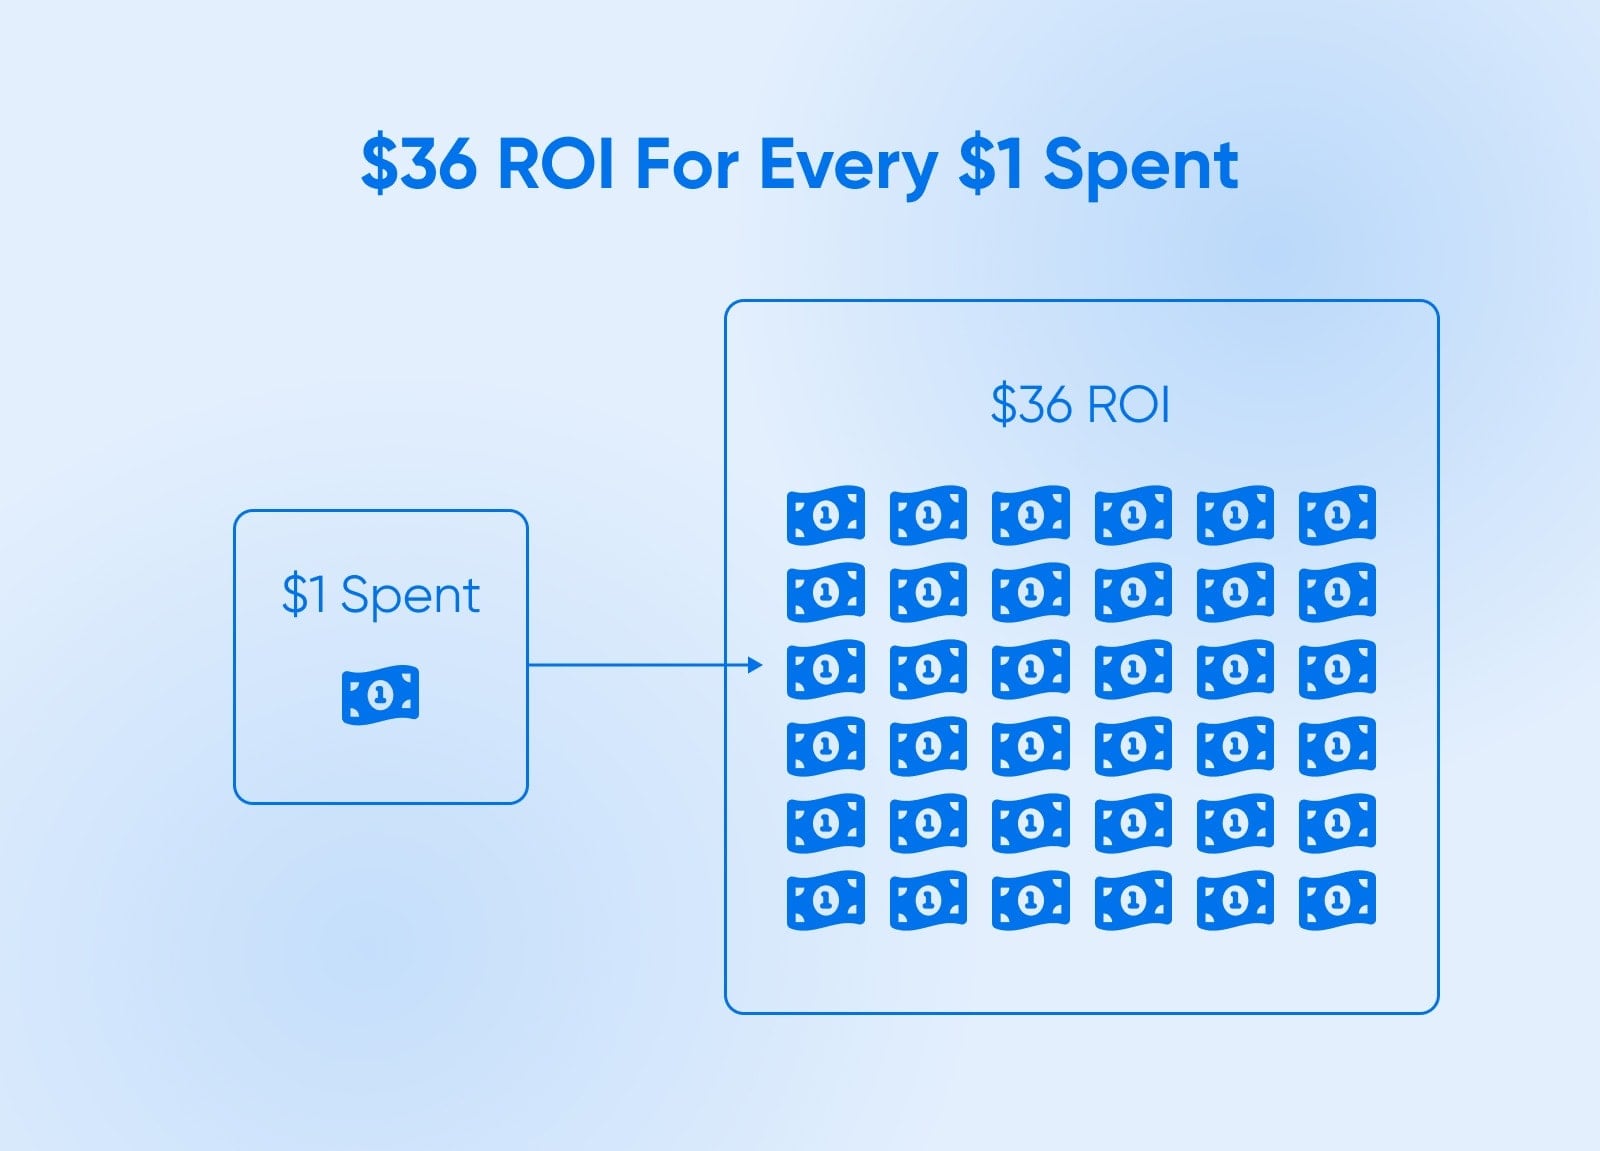 $36 for every $1 spent showing a single dollar multiplying into $36